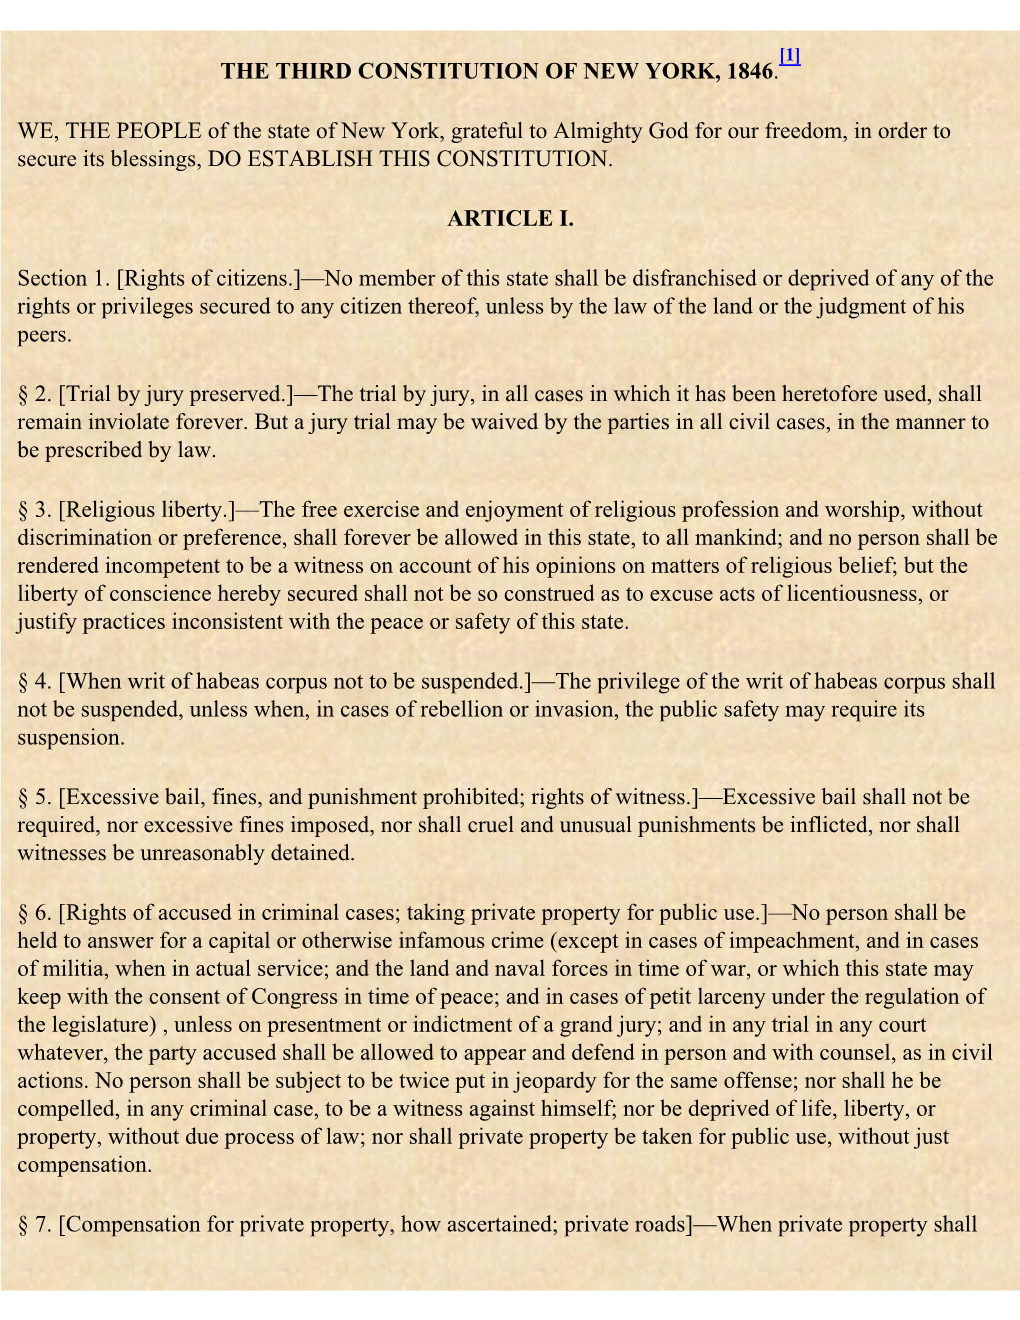 THE THIRD CONSTITUTION of NEW YORK, 1846. WE, the PEOPLE Of